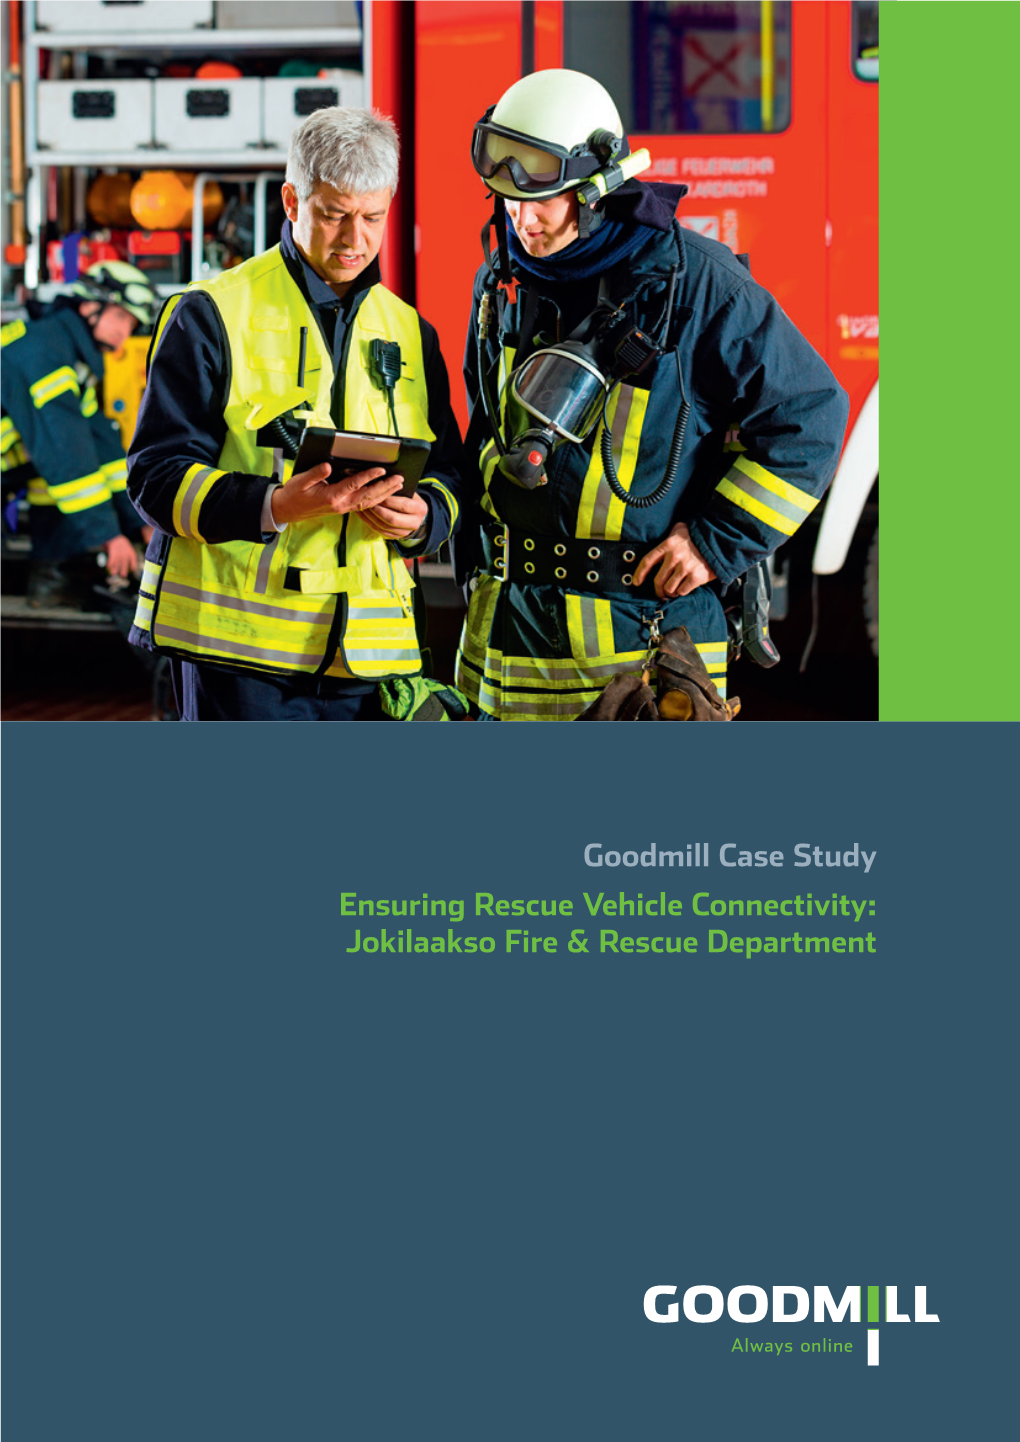 Goodmill Case Study Ensuring Rescue Vehicle Connectivity: Jokilaakso Fire & Rescue Department Goodmill Systems Ltd